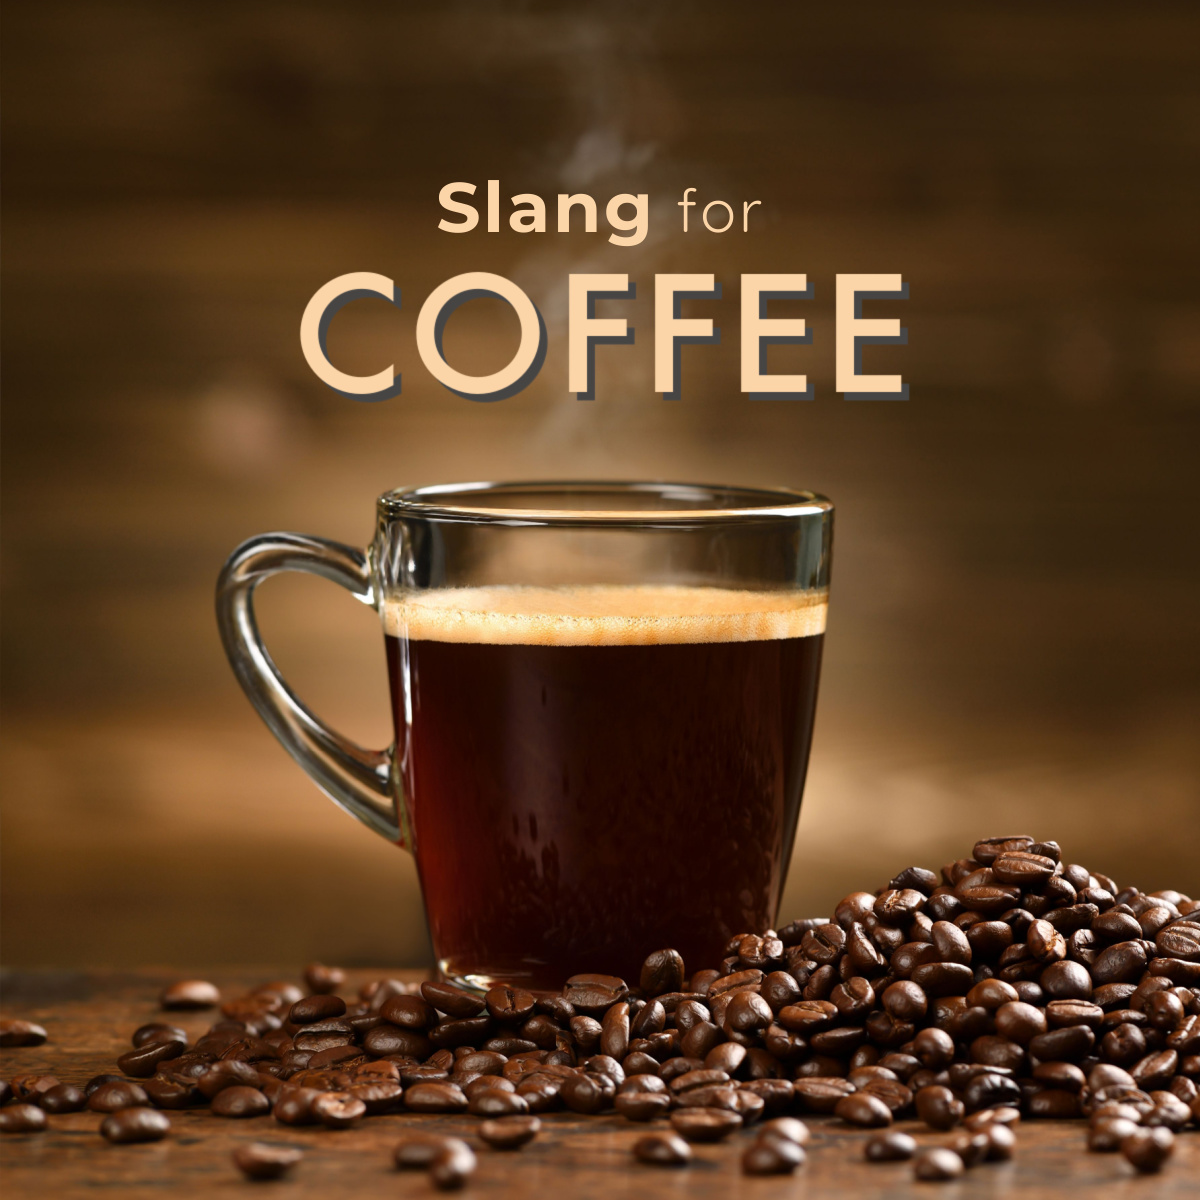 cup of freshly brewed coffee in glass mug text on image slang for coffee